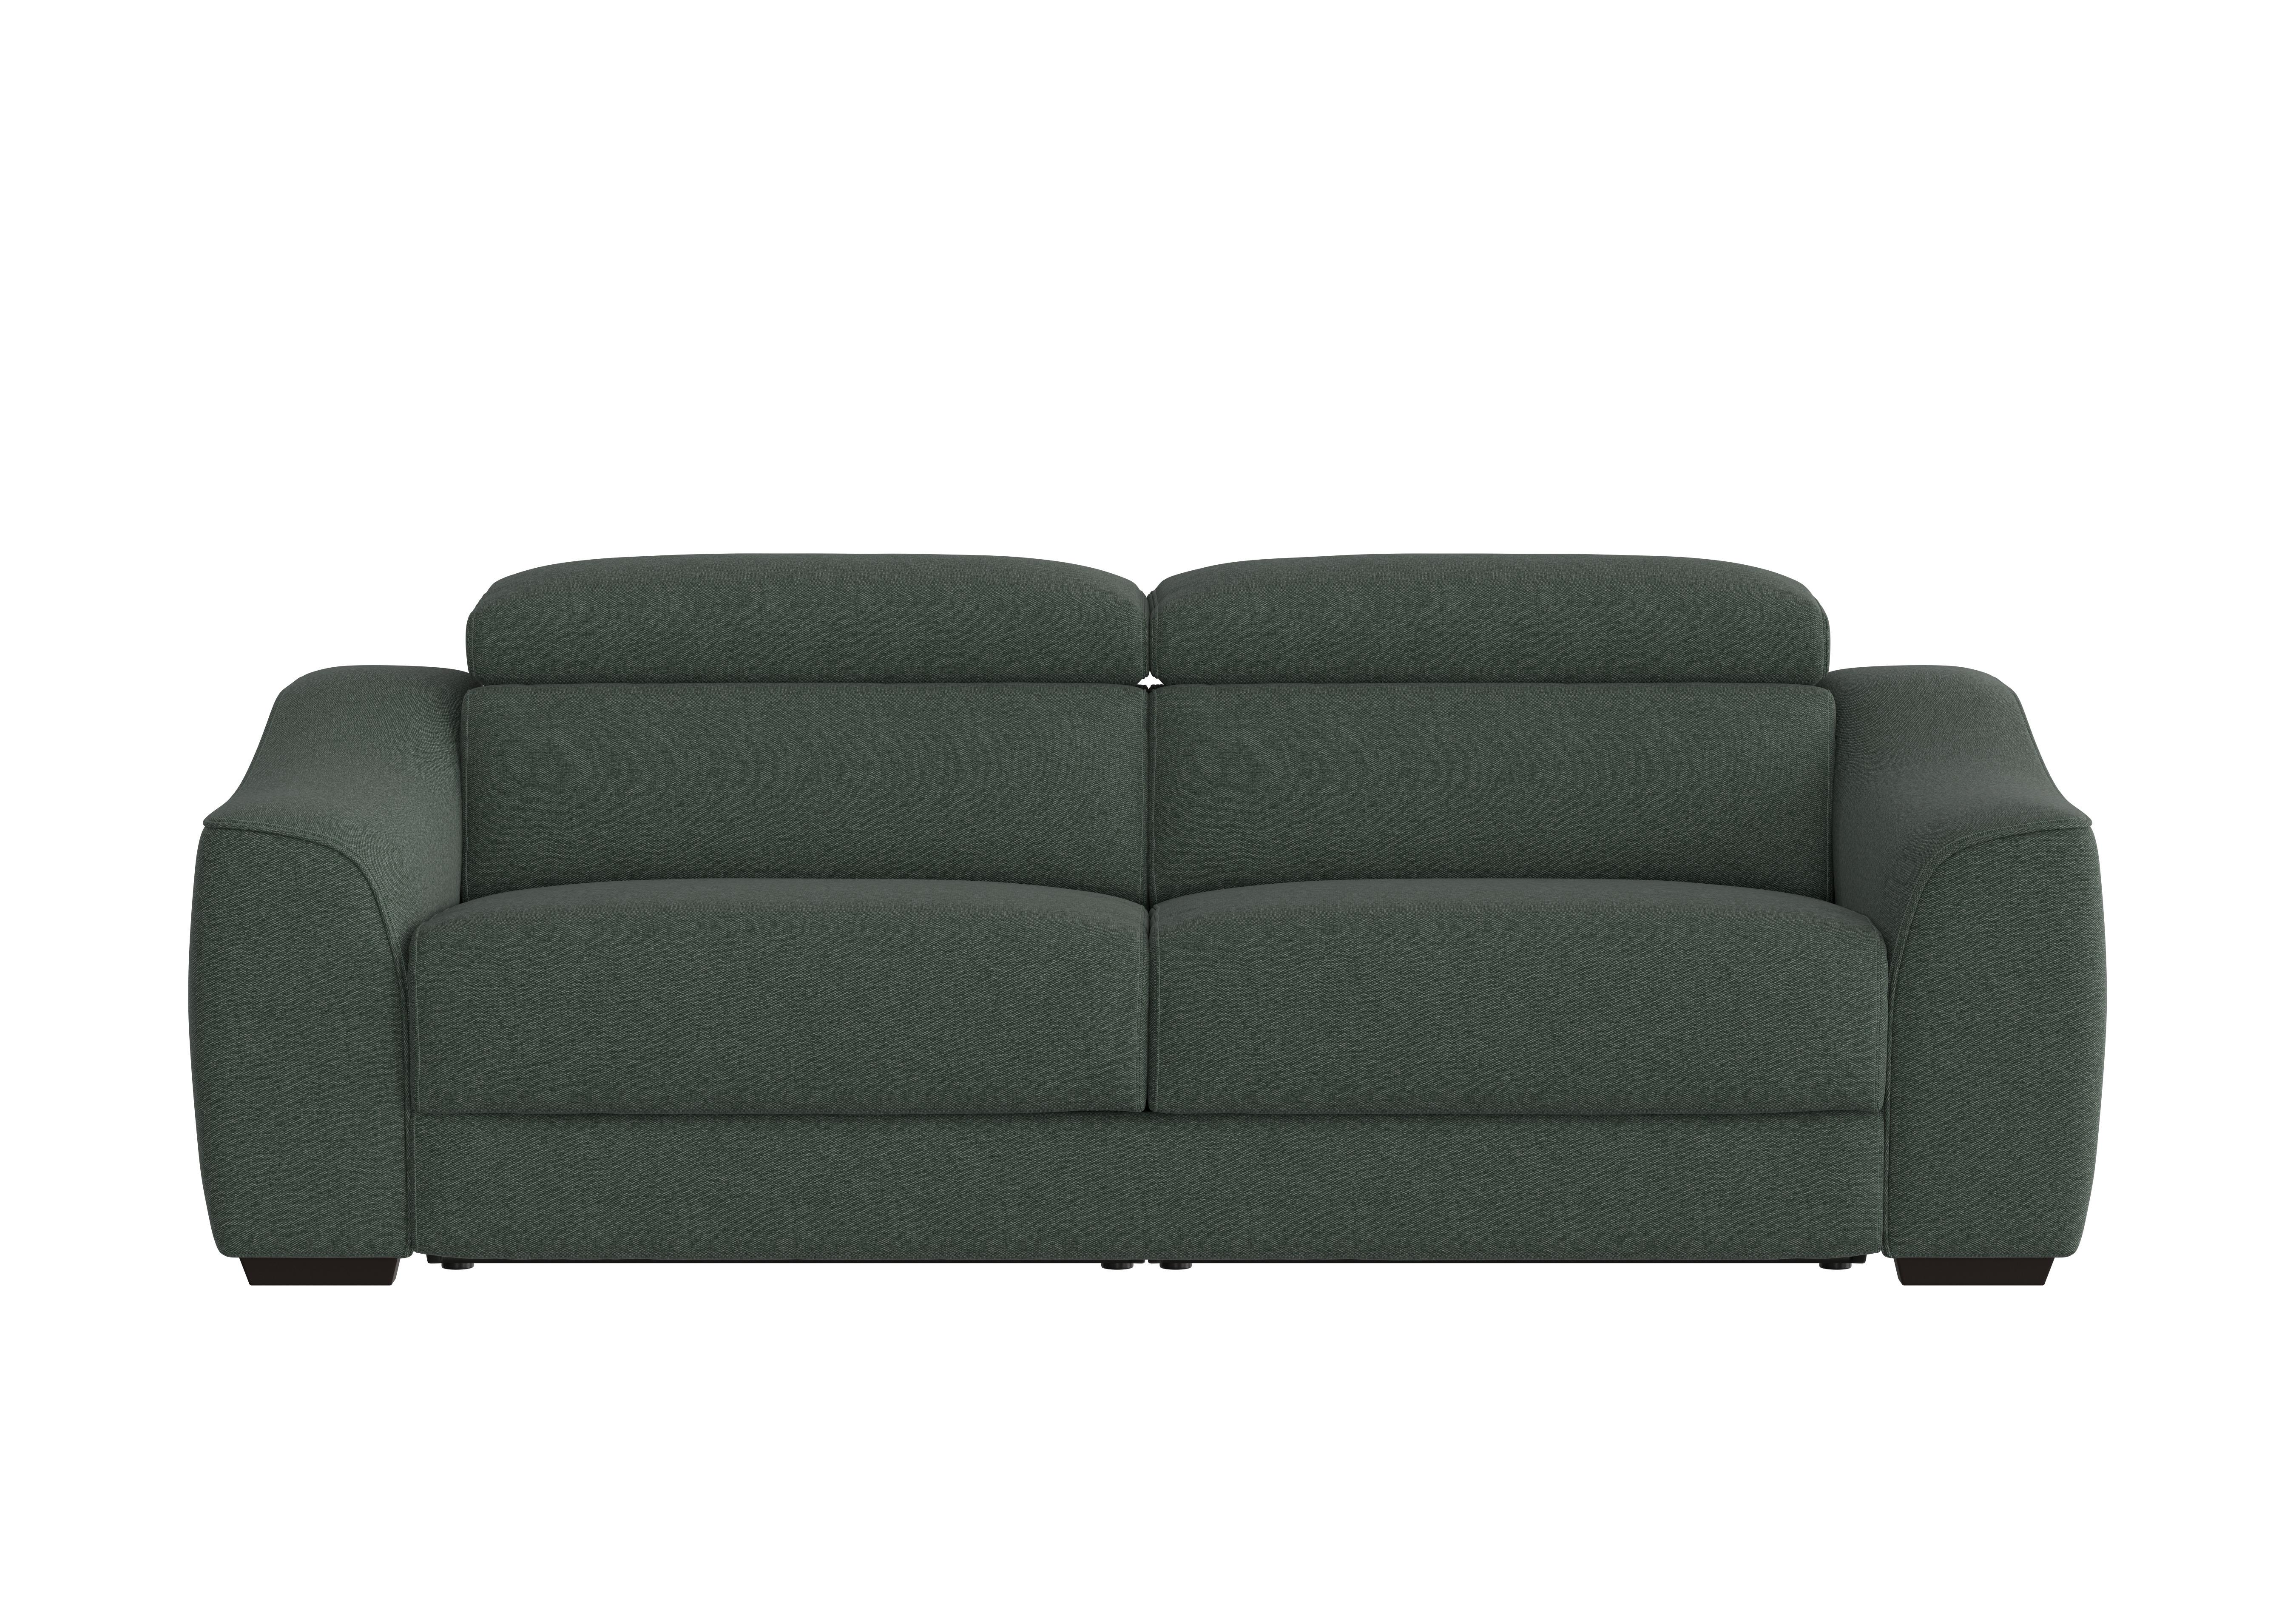 Elixir 3 Seater Fabric Sofa Bed in Fab-Ska-R48 Moss Green on Furniture Village